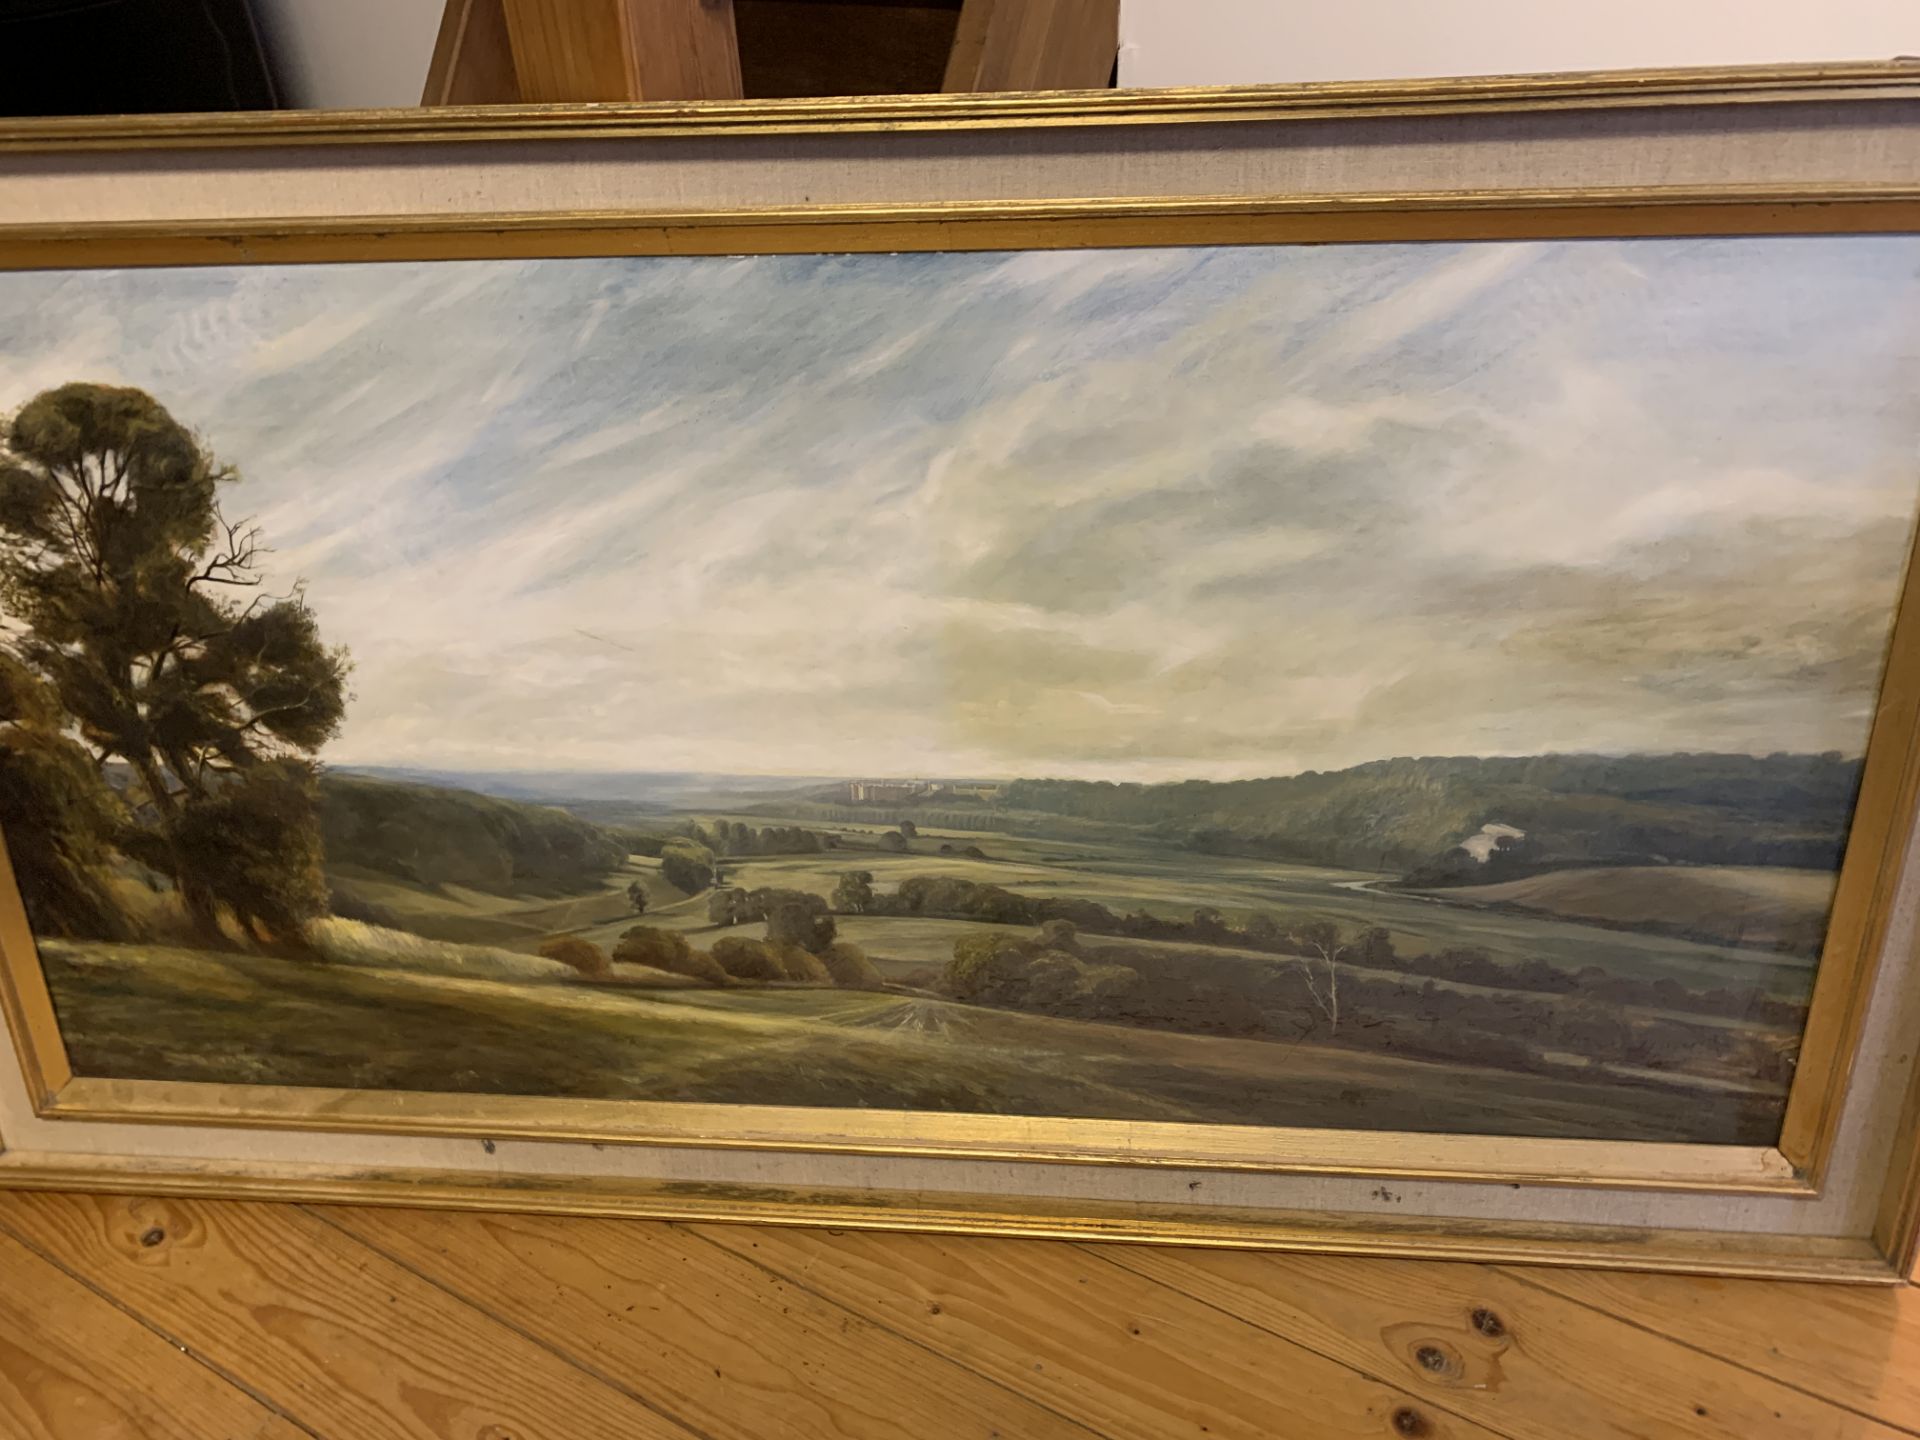 Oil on canvas panorama with Windsor Castle in the distance, signed Christopher Baker 1984